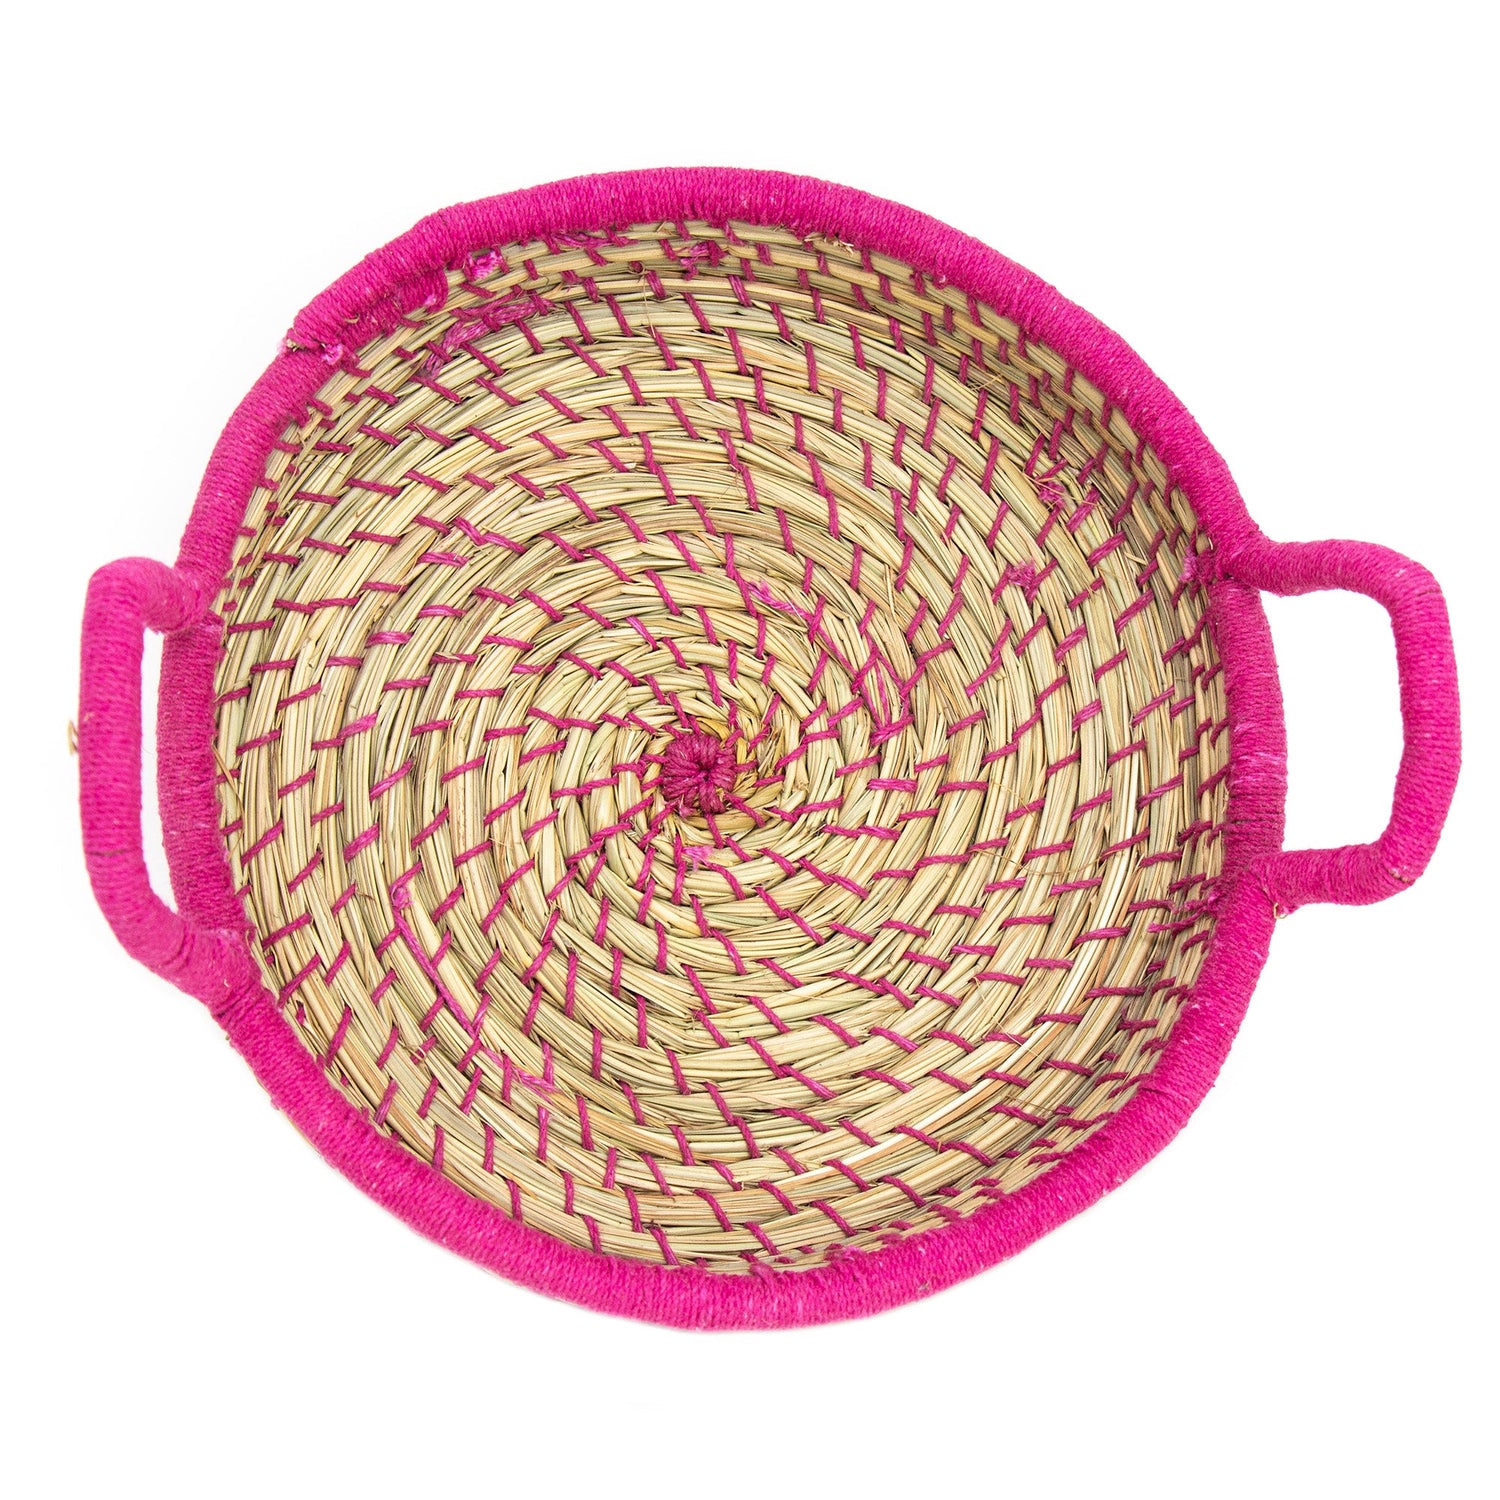 nested-baskets-in-natural-with-pink-accents-set-of-3